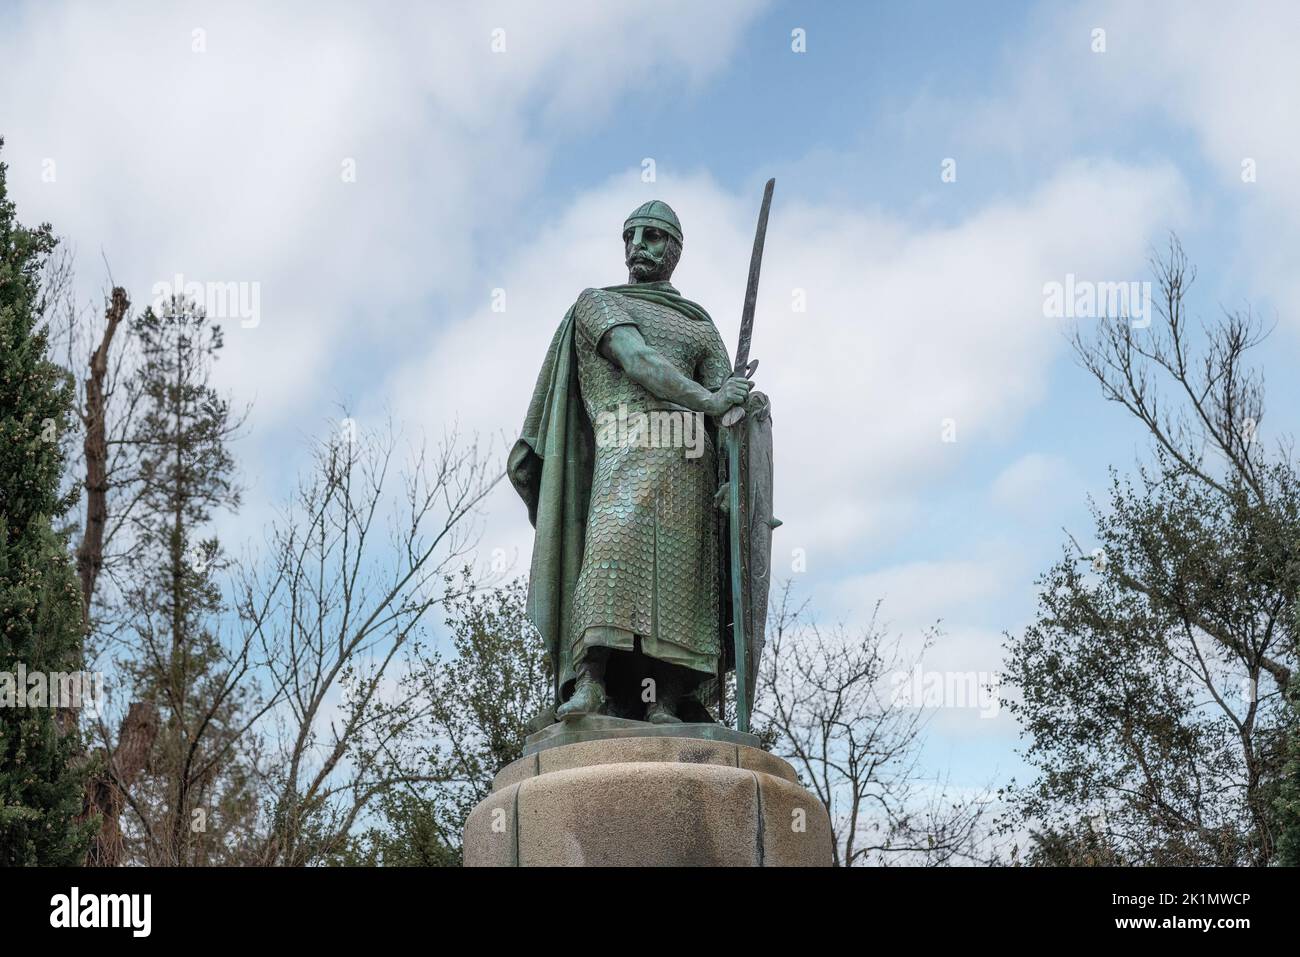 King Afonso Henriques Statue (Afonso I of Portugal), sculpted by Soares dos Reis in 1887 - Guimaraes, Portugal Stock Photo